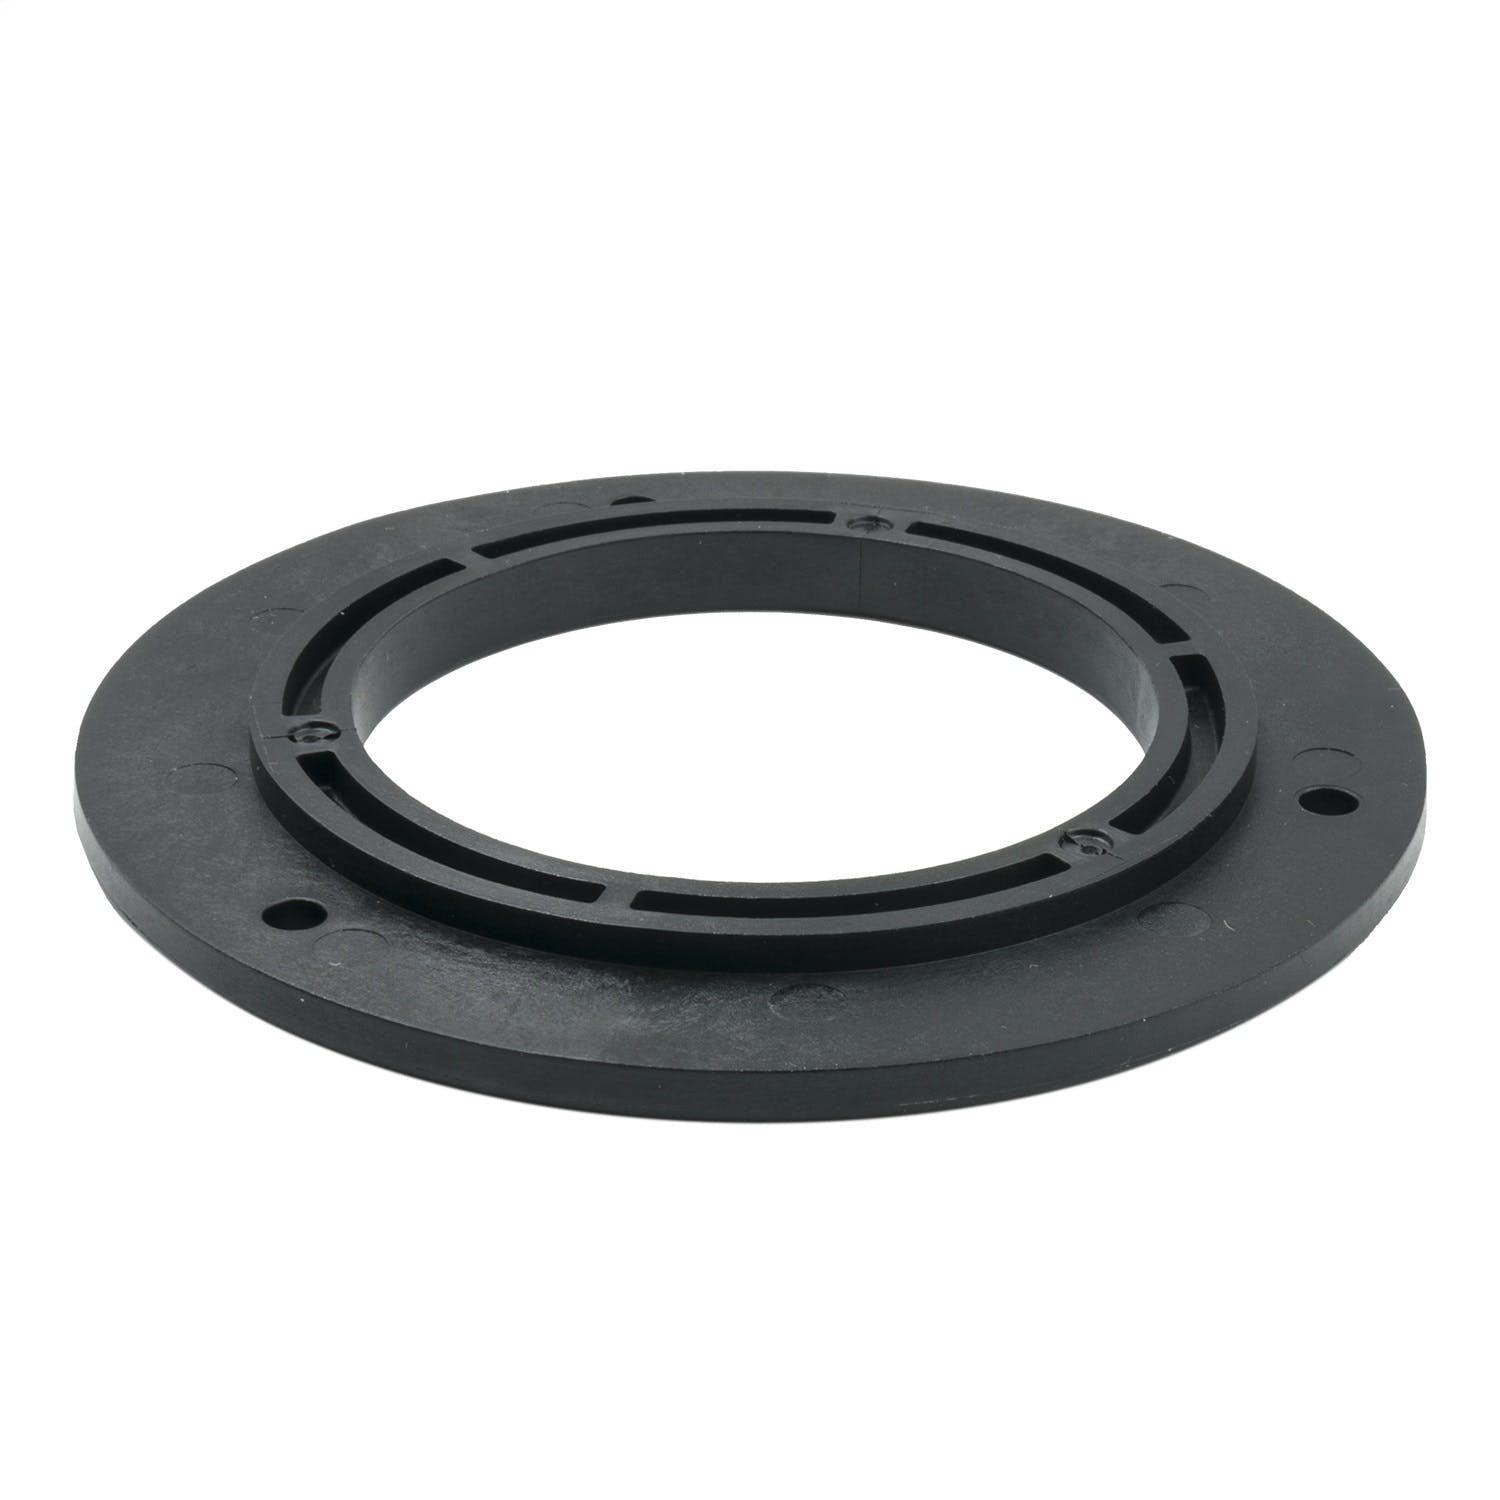 AutoMeter Products 5322 Gauge Mount Adapter 2 5/8 TO 2 1/16, Black